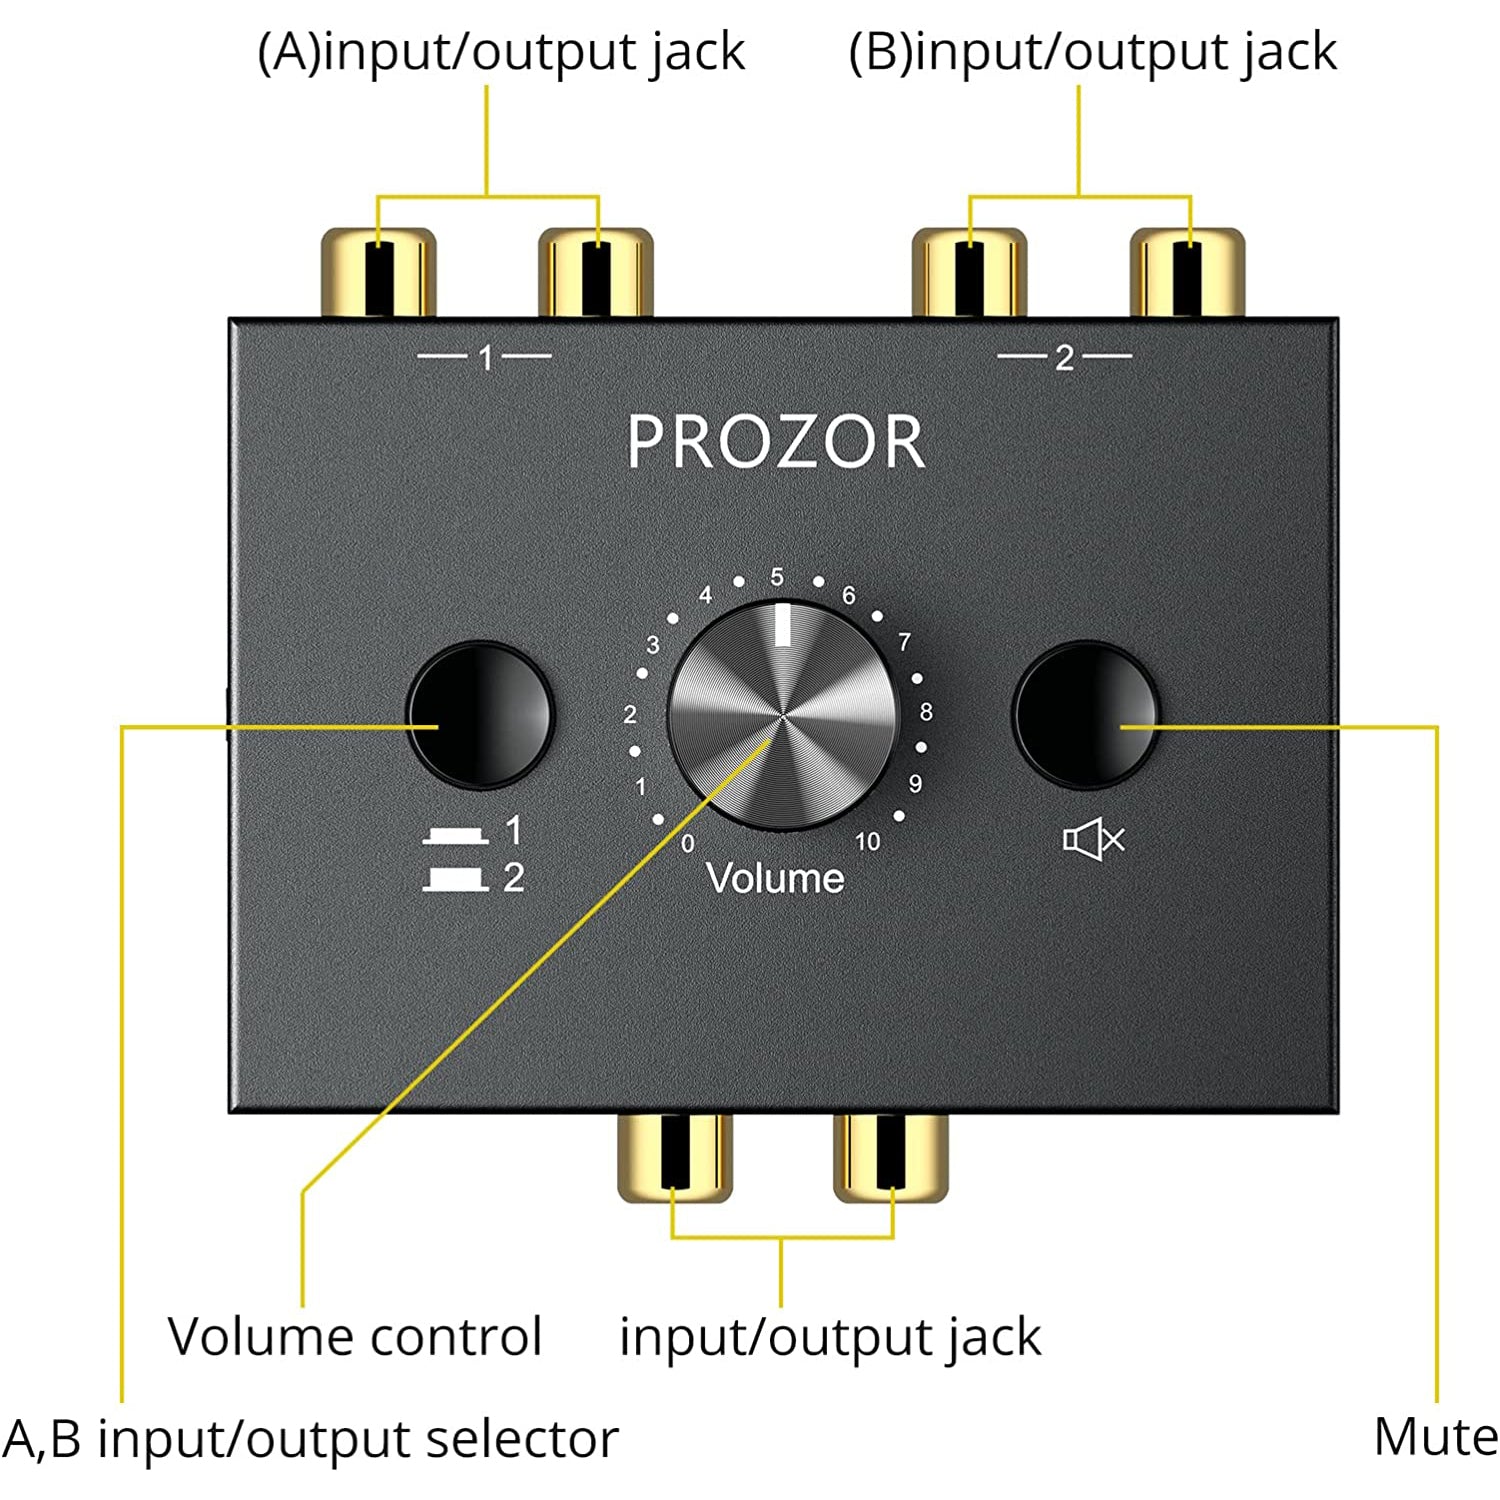 PROZOR 2 in 1 Out R/L Stereo Audio Switch 1 in 2 Out Stereo Audio Splitter